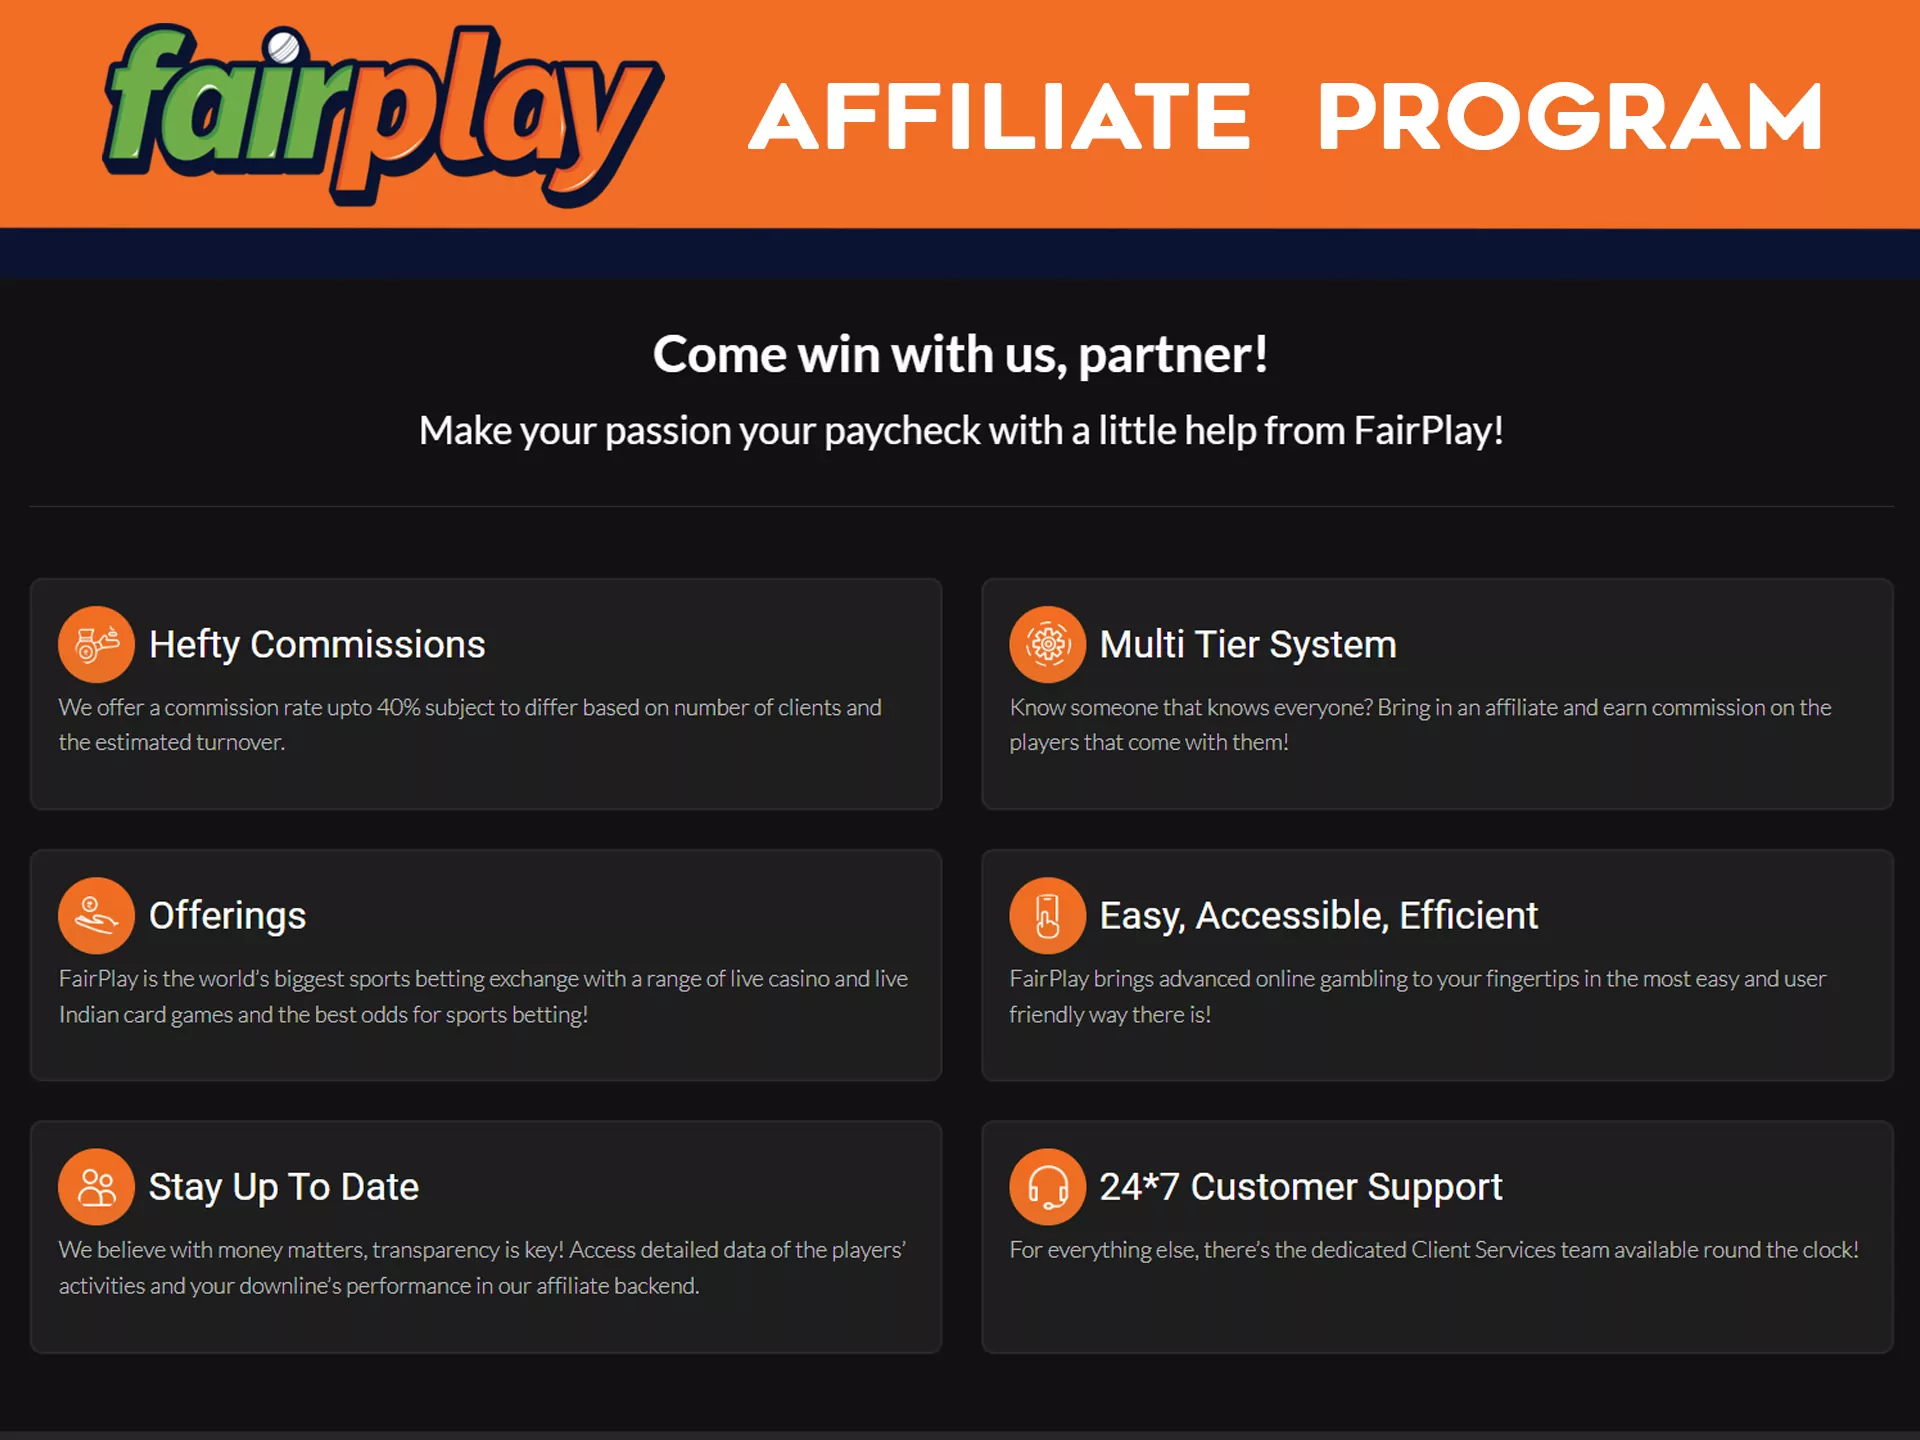 Fairplay offers an affiliate program to its players.